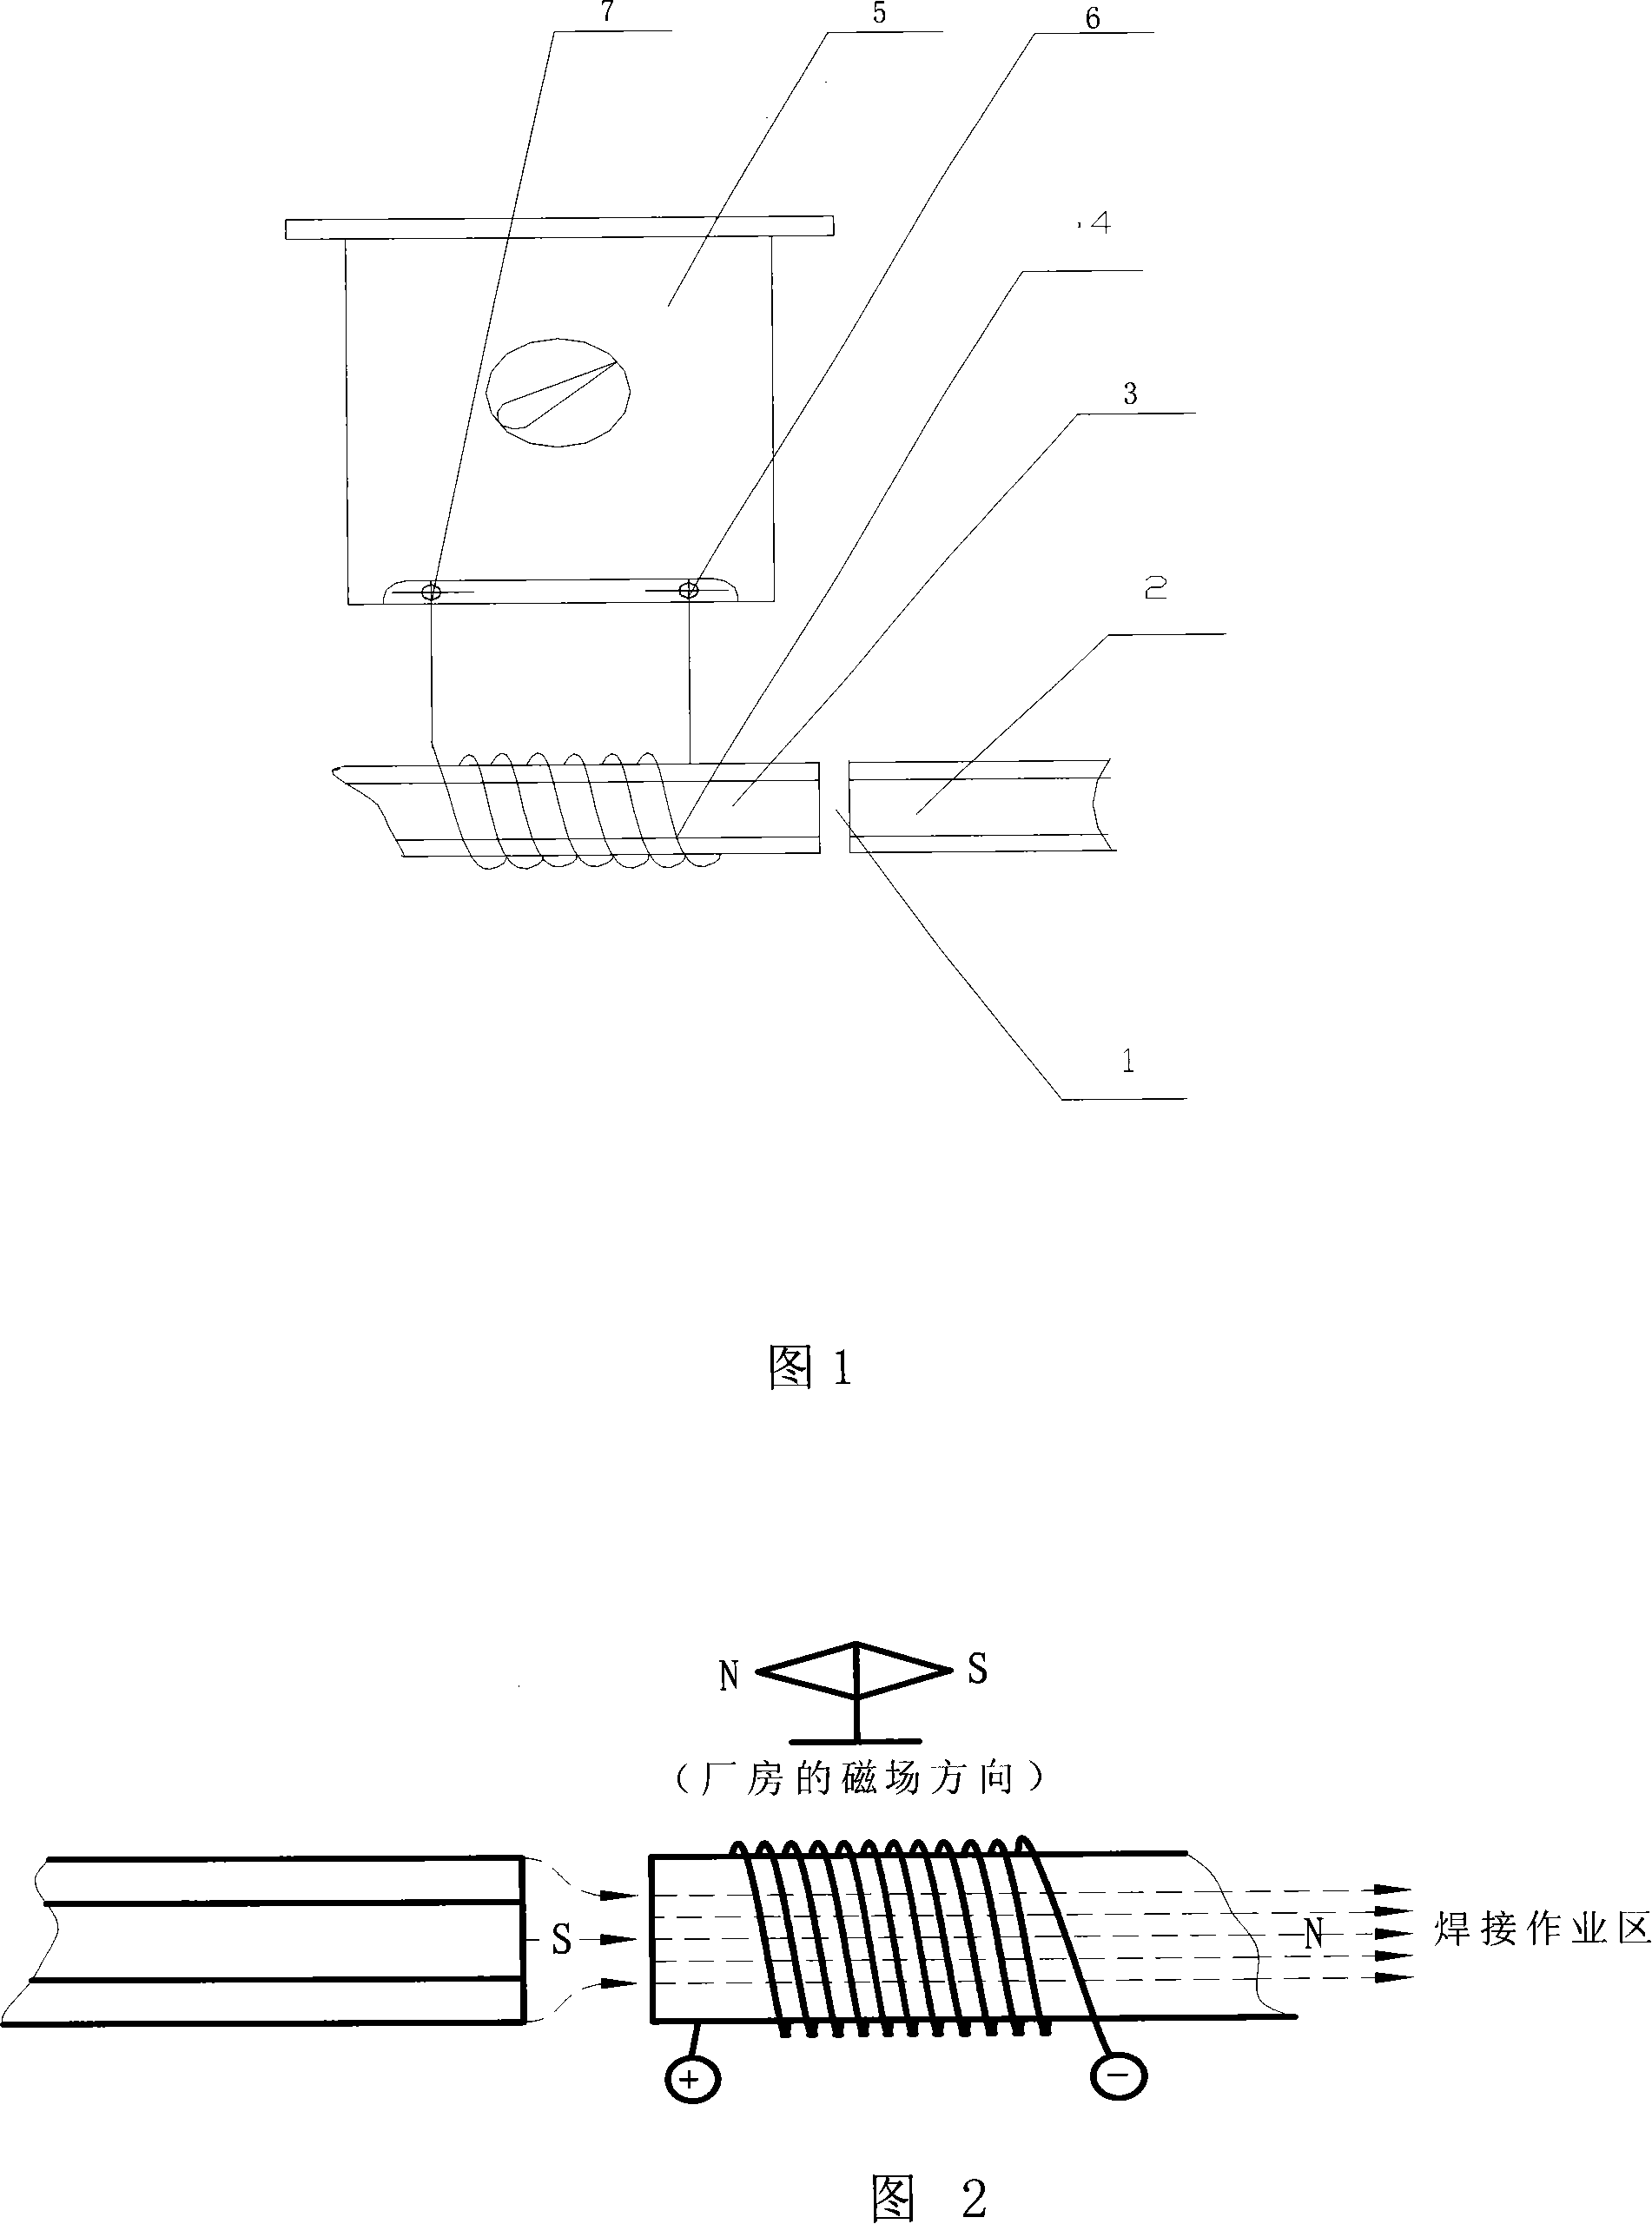 Method for welding metal under strong magnetic field circumstance